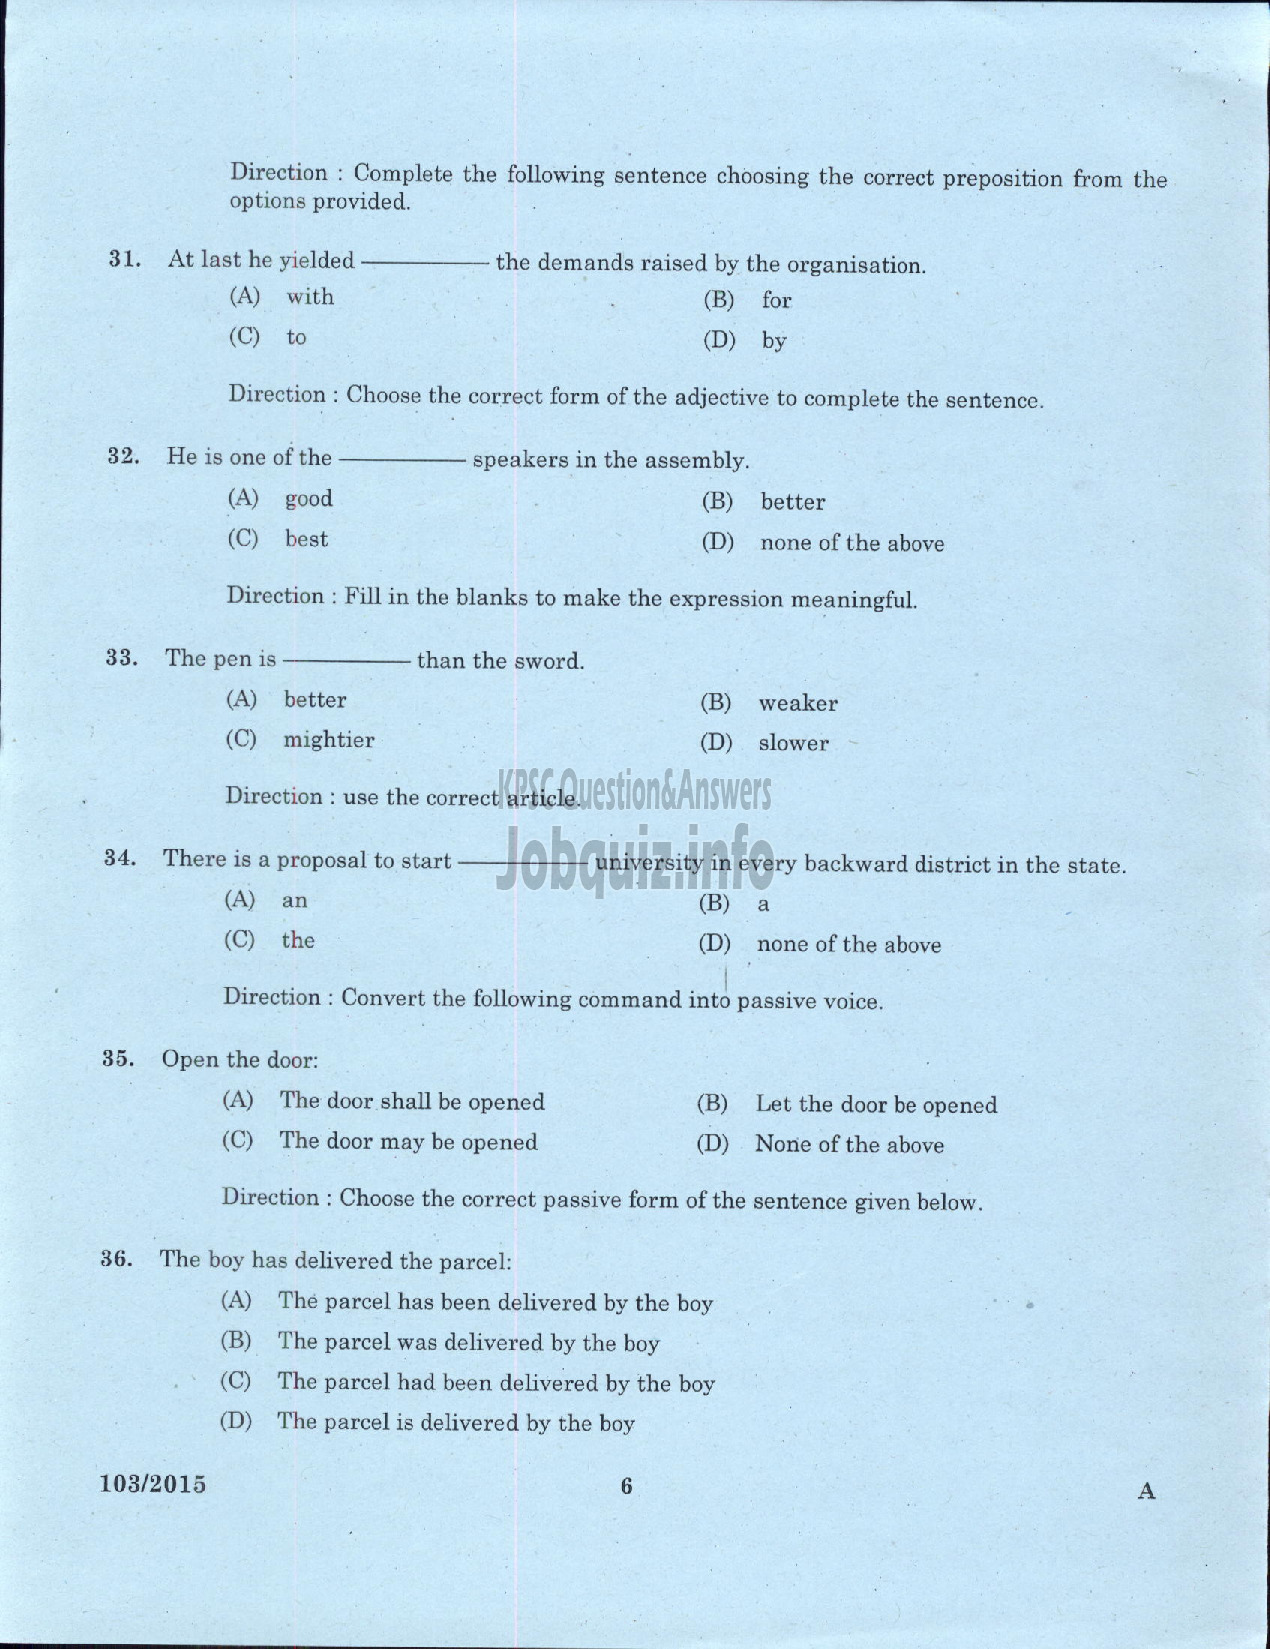 Kerala PSC Question Paper - ADMINISTRATIVE OFFICER BY TRANSFER INTERNAL KSRTC-4